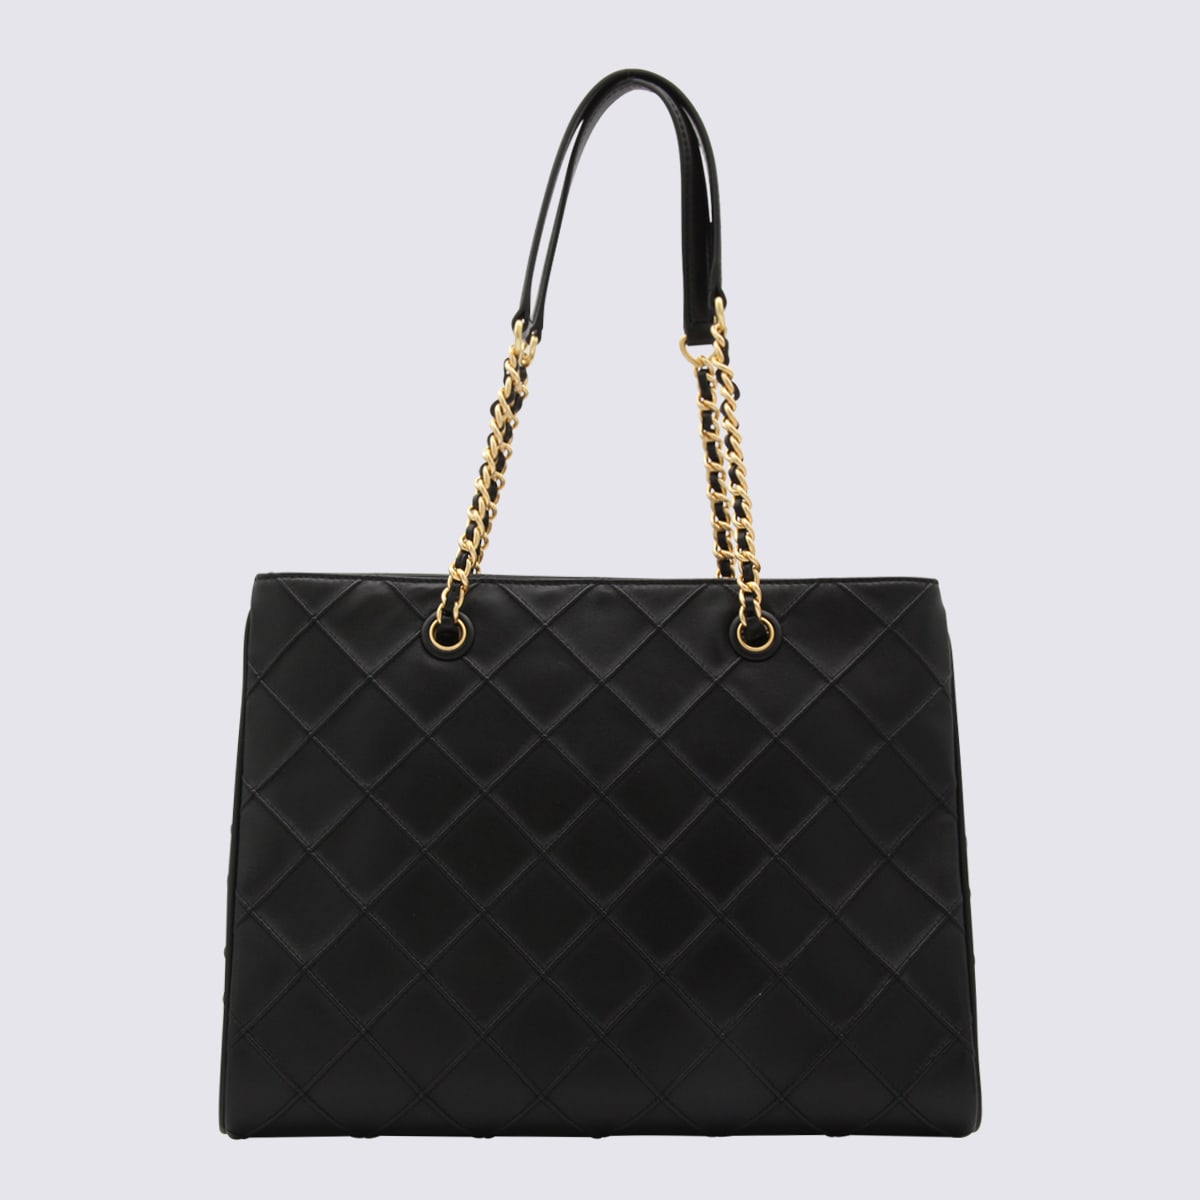 Shop Tory Burch Black Leather Tote Bag